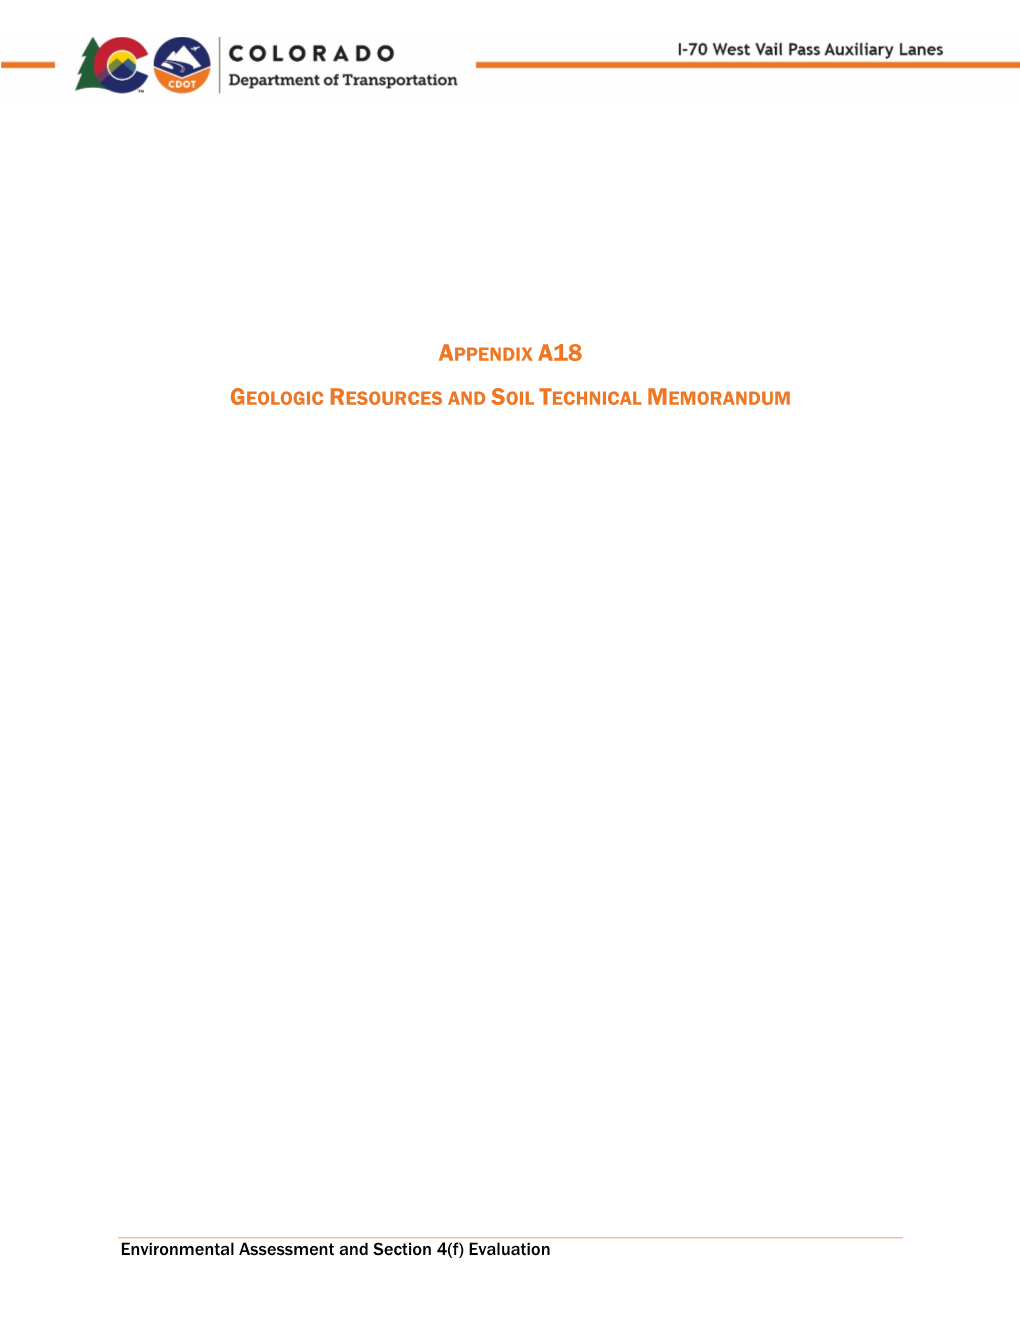 APPENDIX A18 GEOLOGIC RESOURCES and SOIL TECHNICAL MEMORANDUM February 2020 by Yeh & Associates